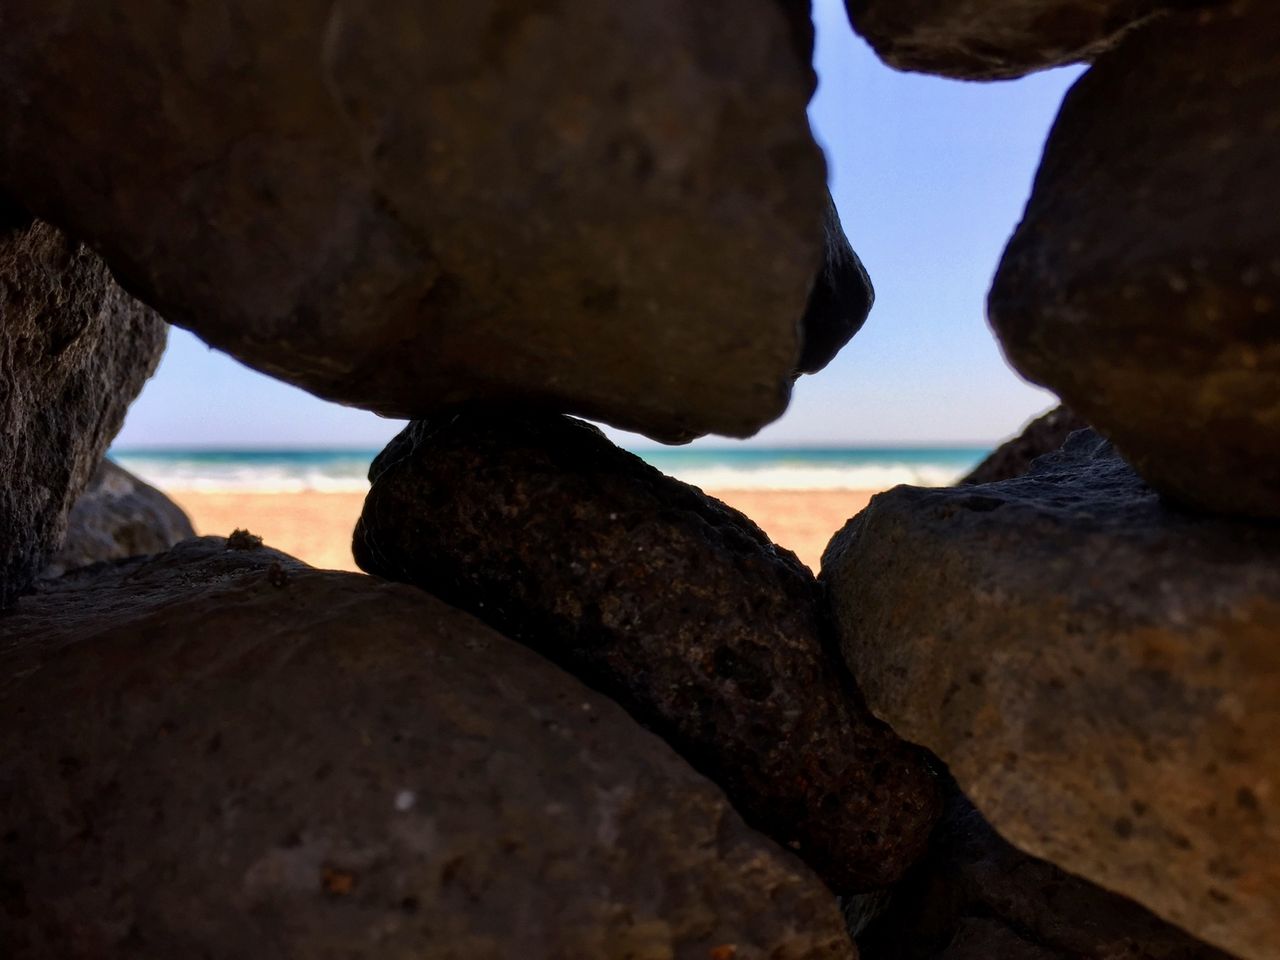 Peeking through the holes in a pile of rocks at the beach.